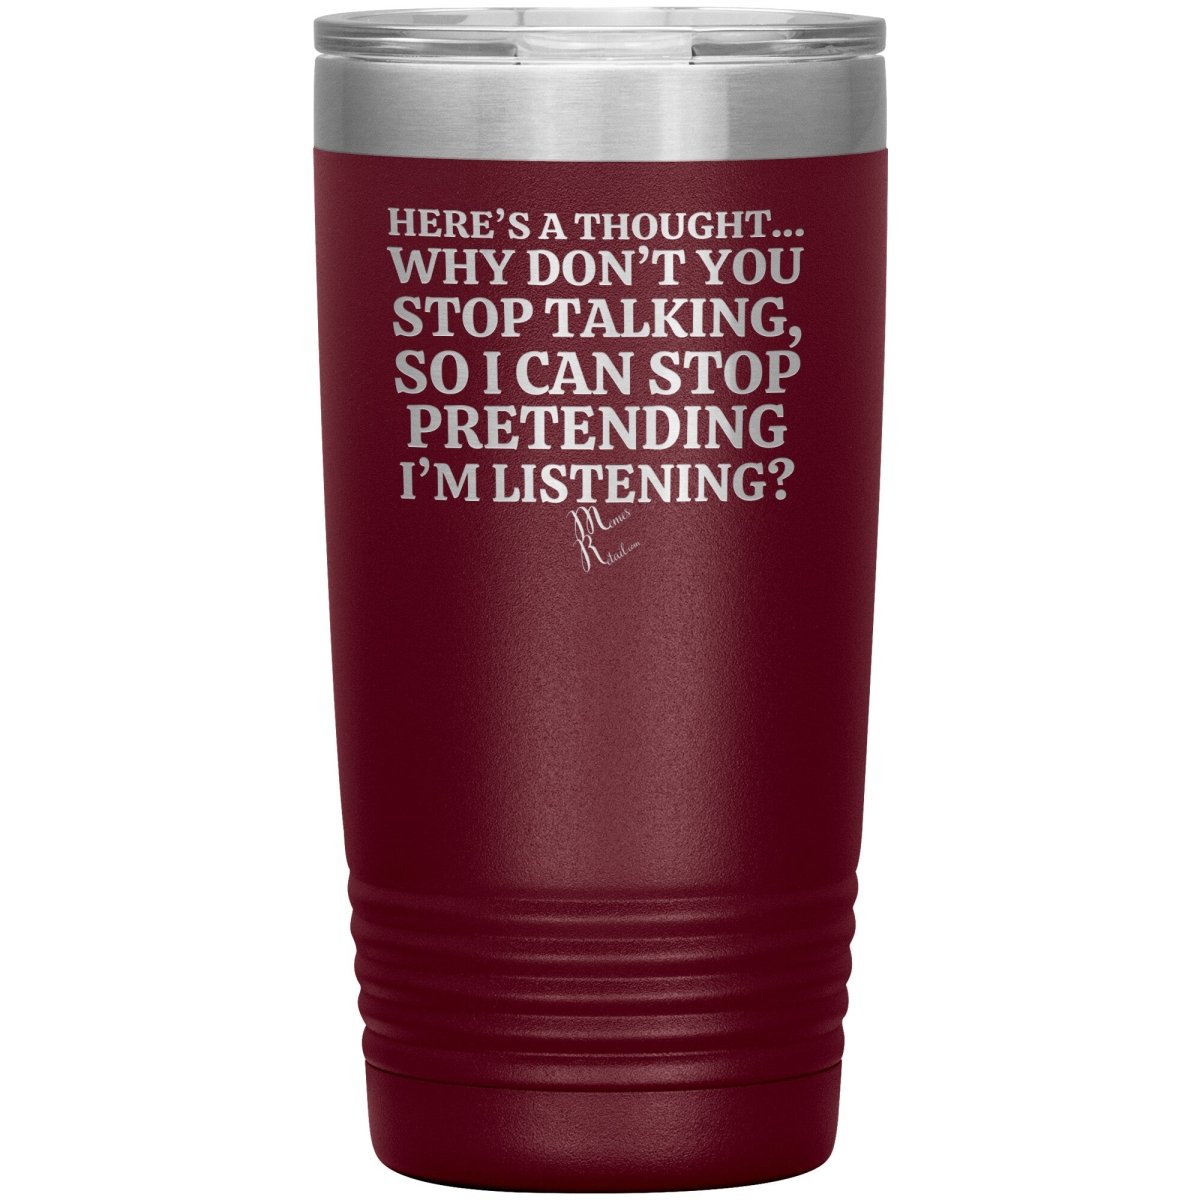 Here's A Thought...Why Don't You Stop Talking Tumblers, 20oz Insulated Tumbler / Maroon - MemesRetail.com